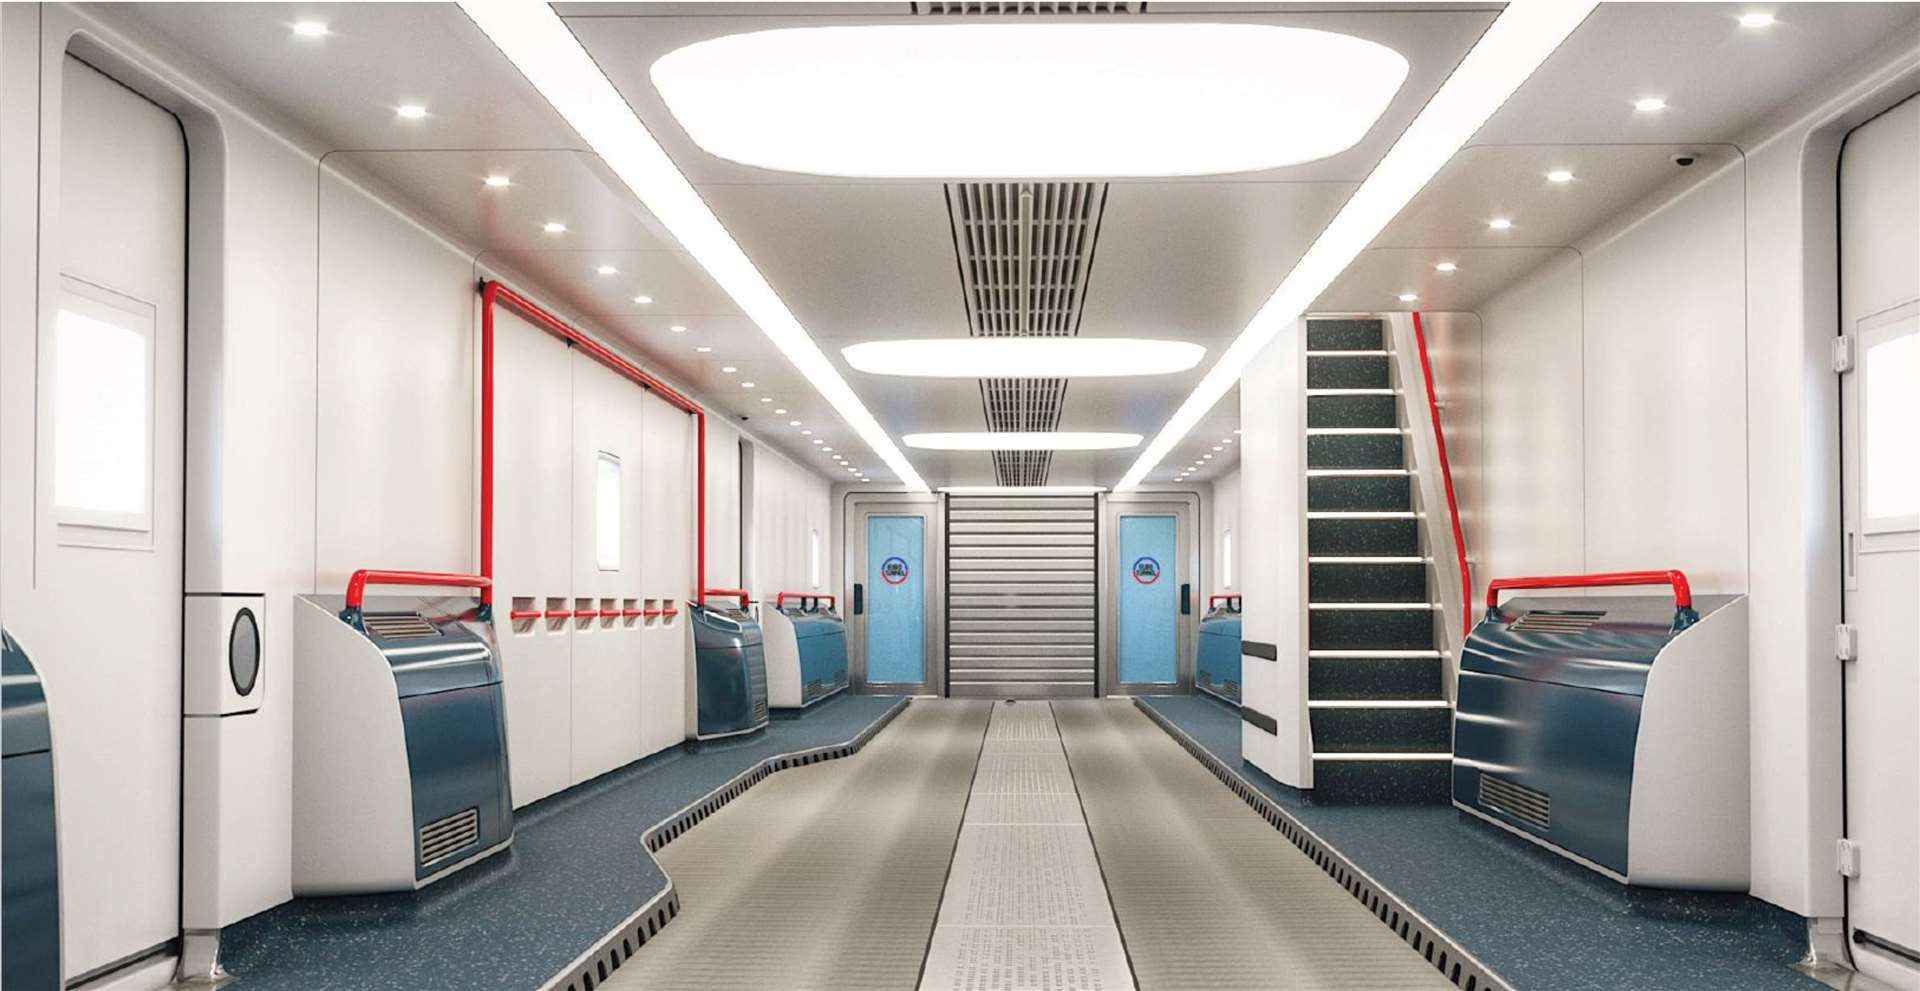 How the passenger shuttles could look once renovated. Credit: Eurotunnel (7932963)